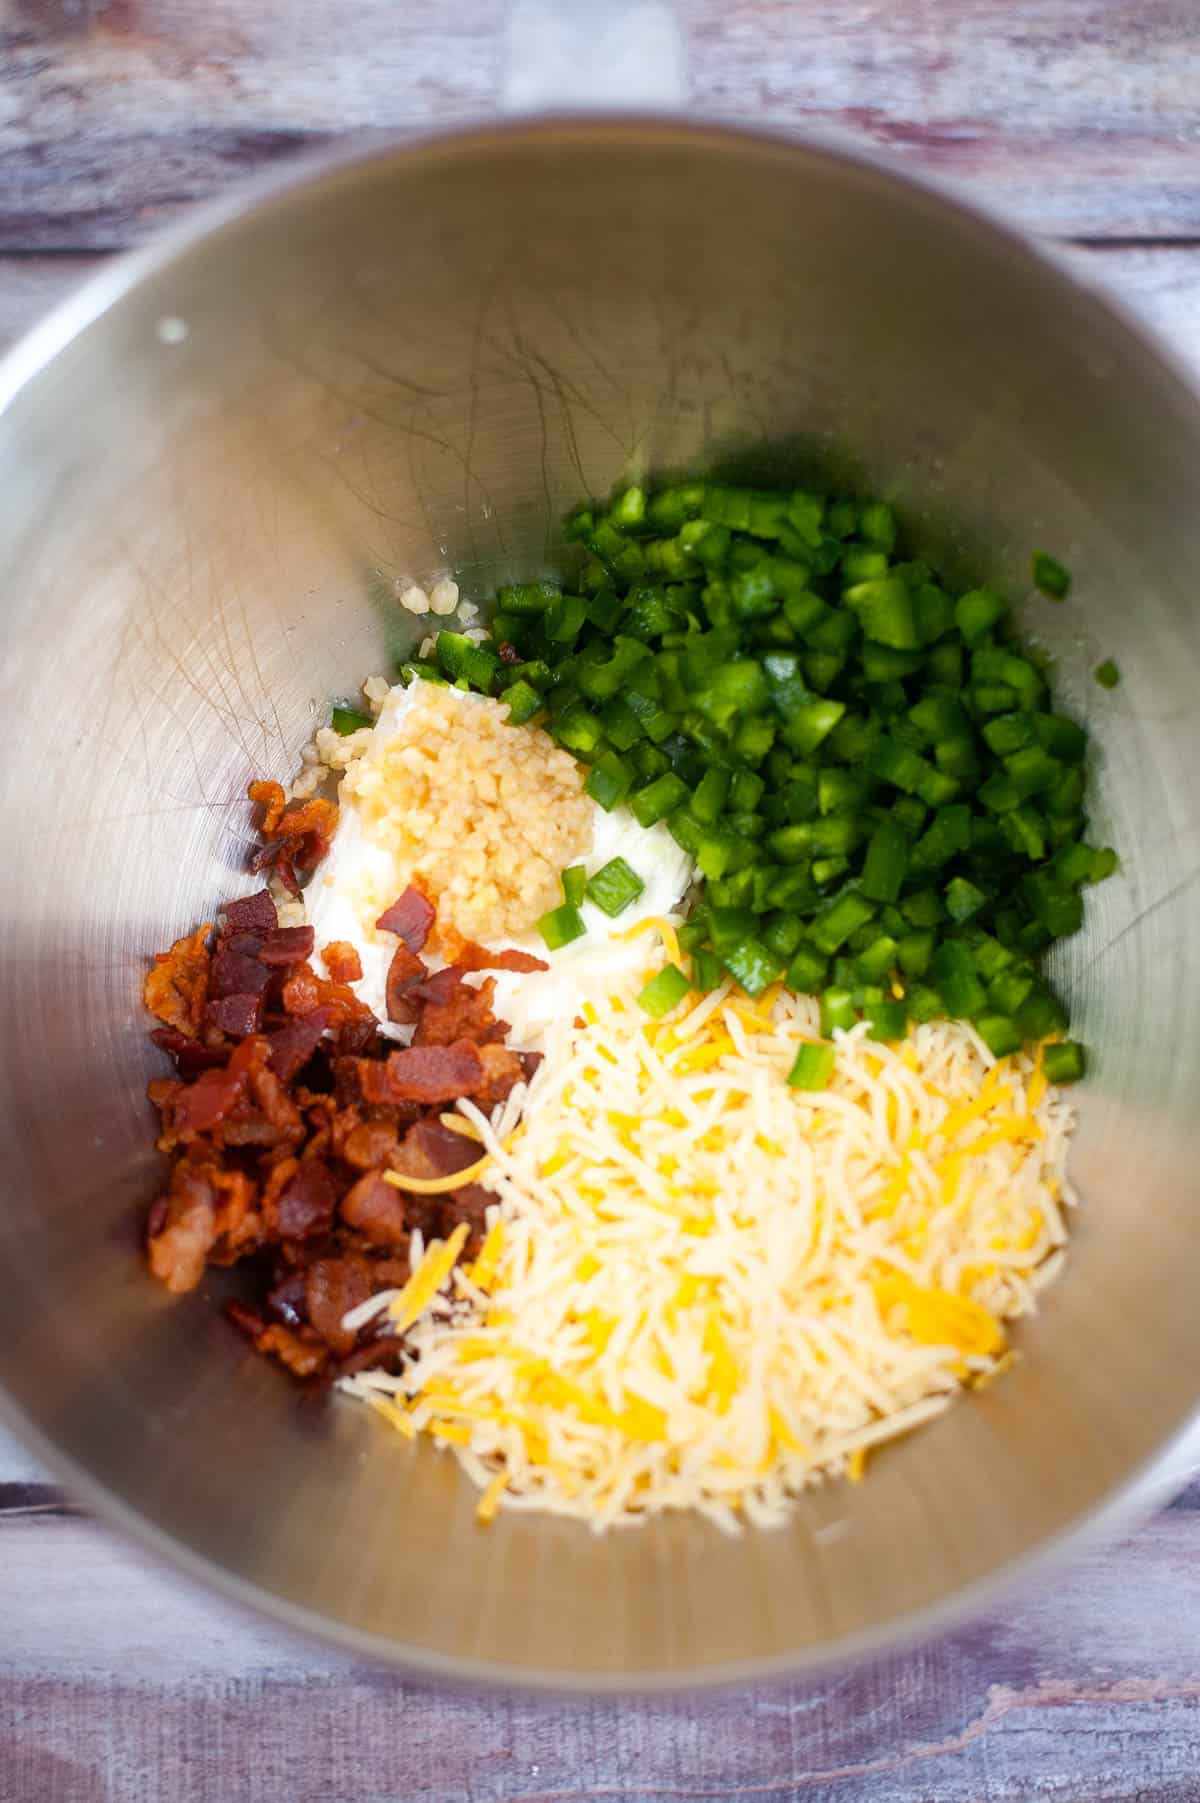 Bacon and cheese topped bowl with green onions.